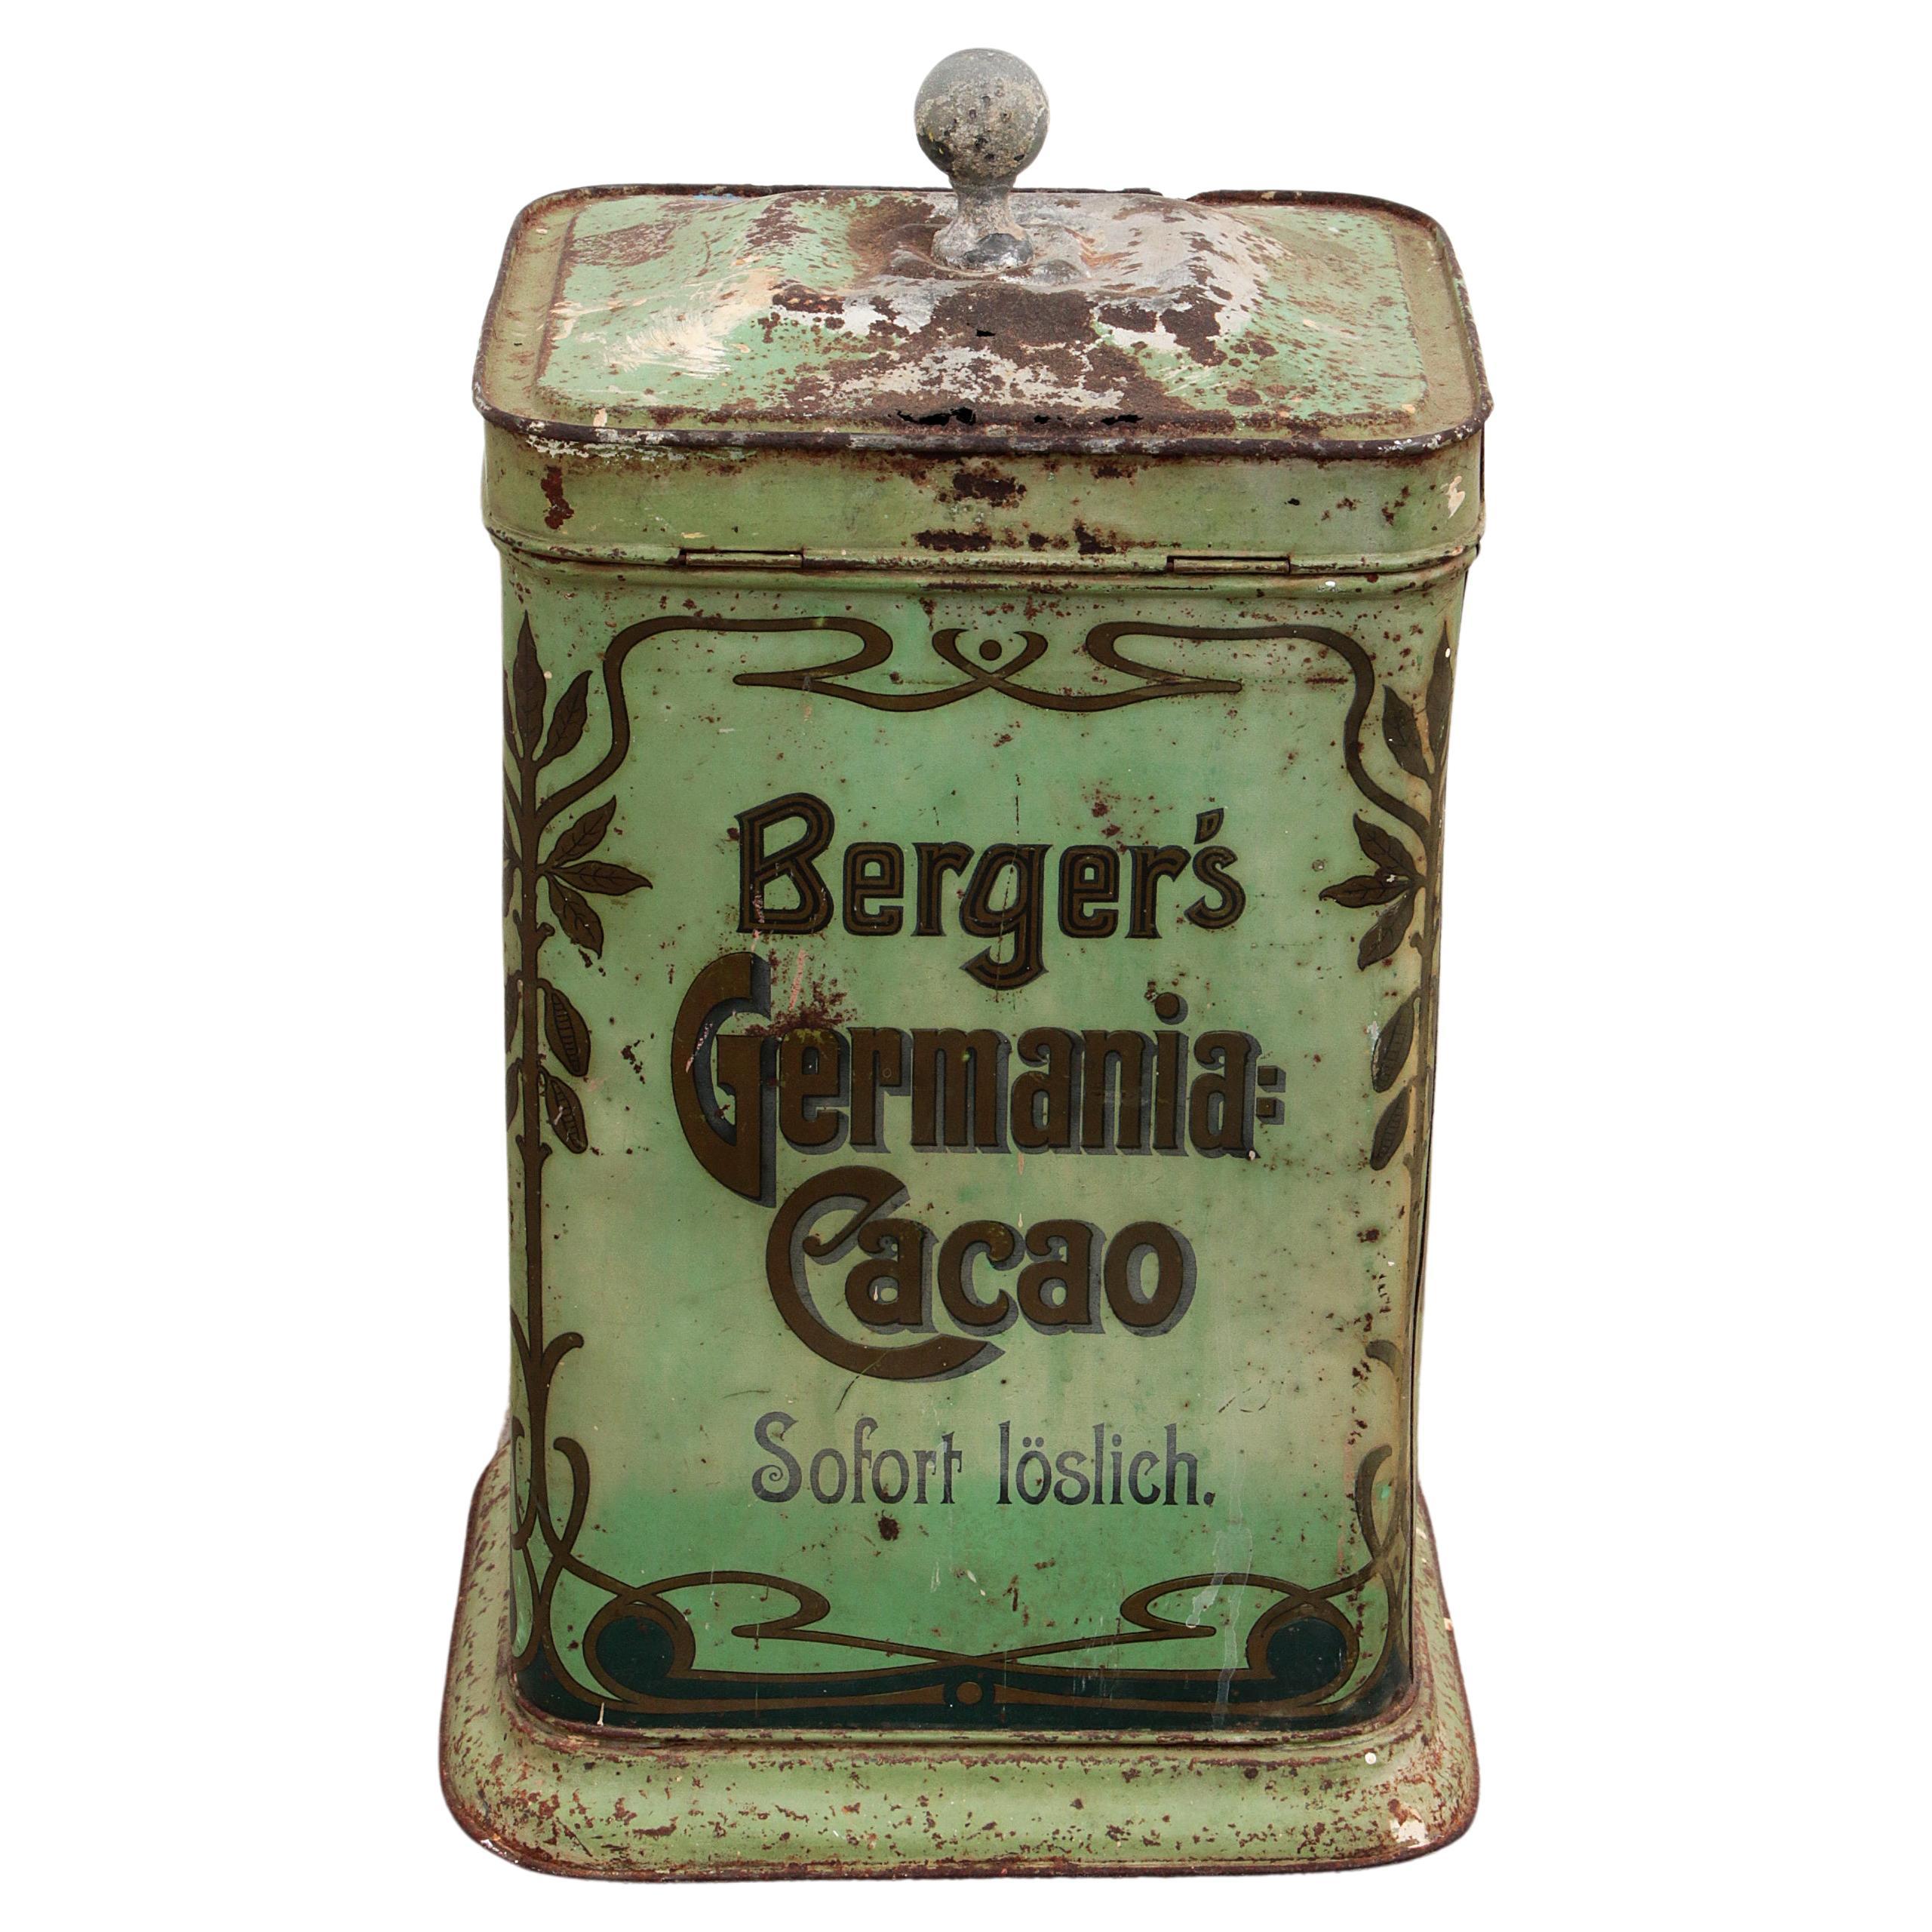 Berger's Germania-Cacao Storage Tin 1900-1930 For Sale